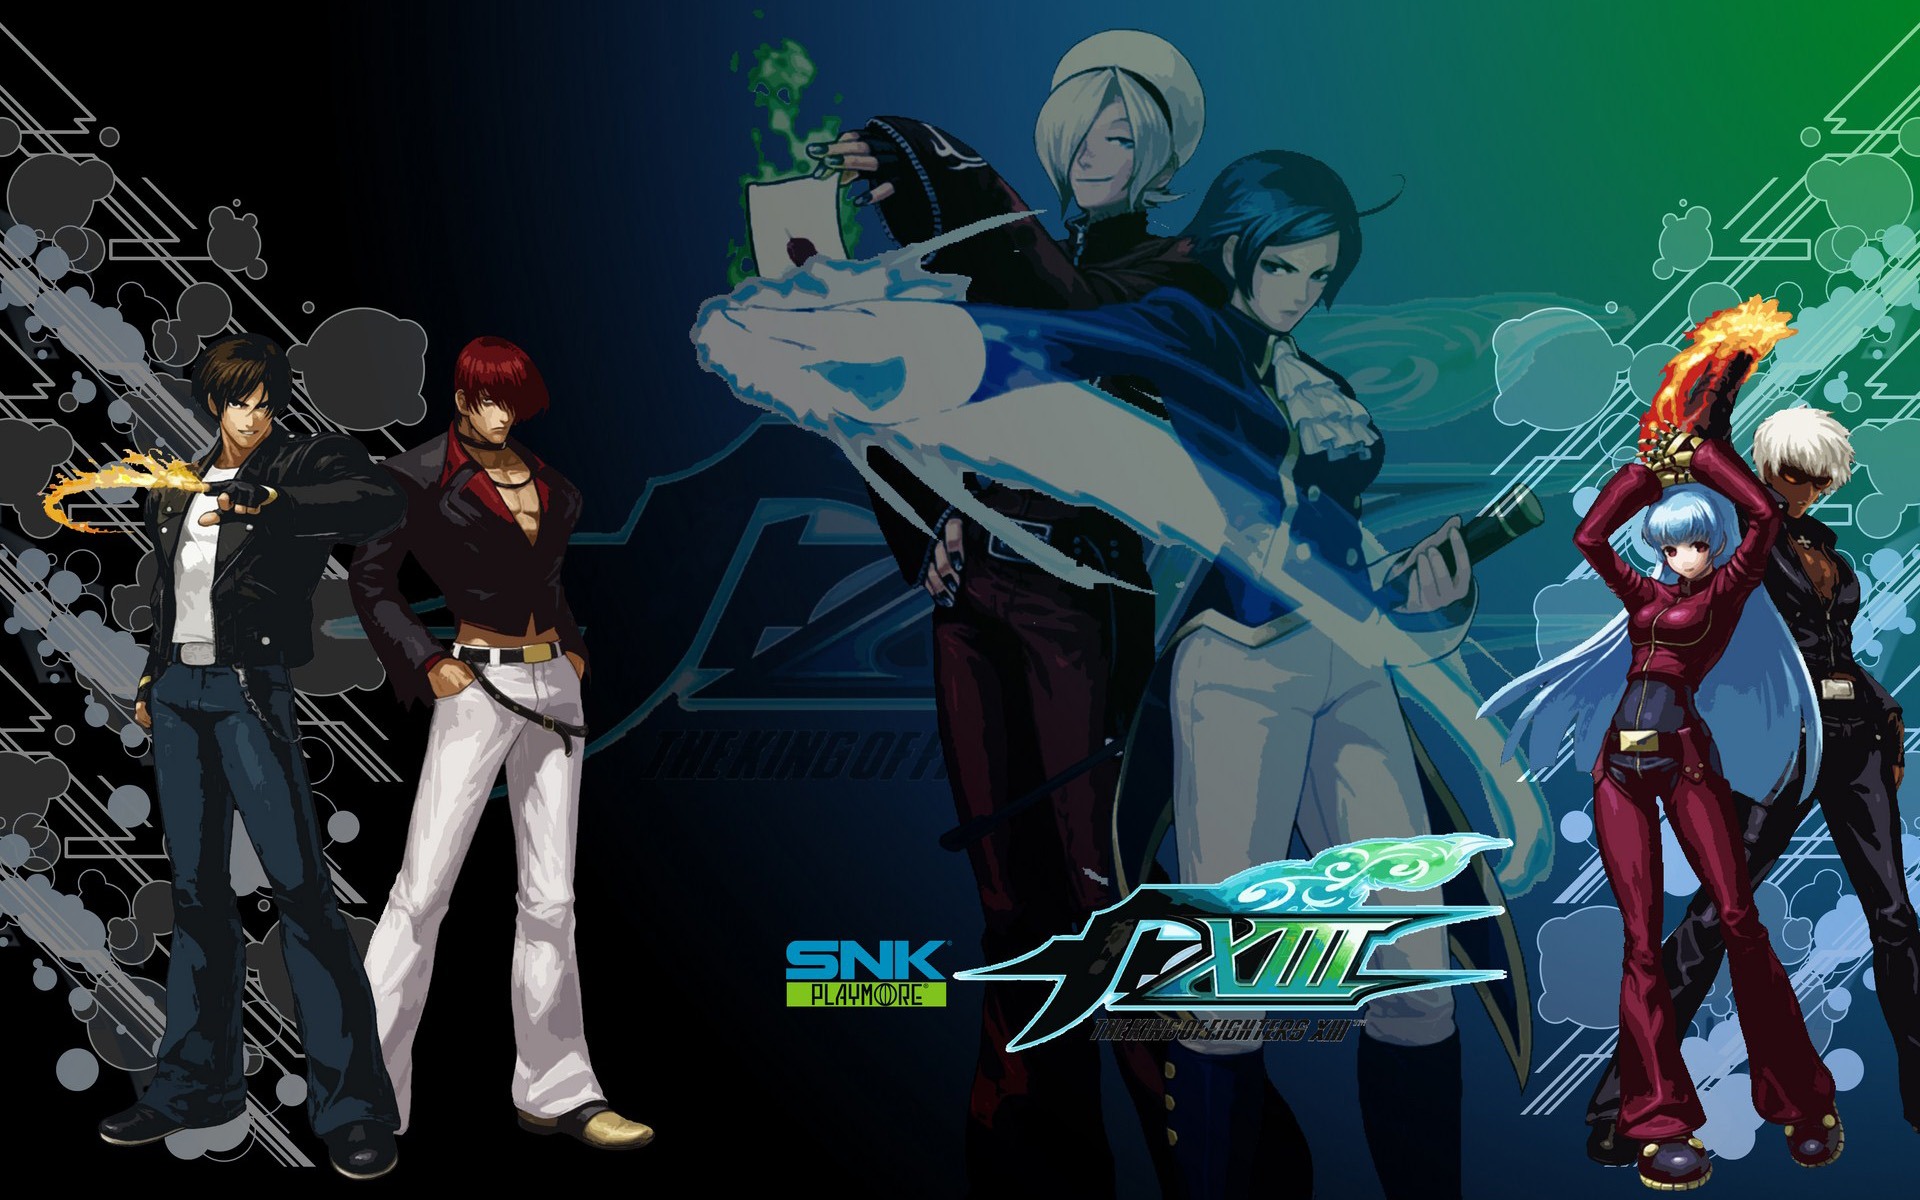 The King of Fighters XIII 拳皇13 壁纸专辑4 - 1920x1200